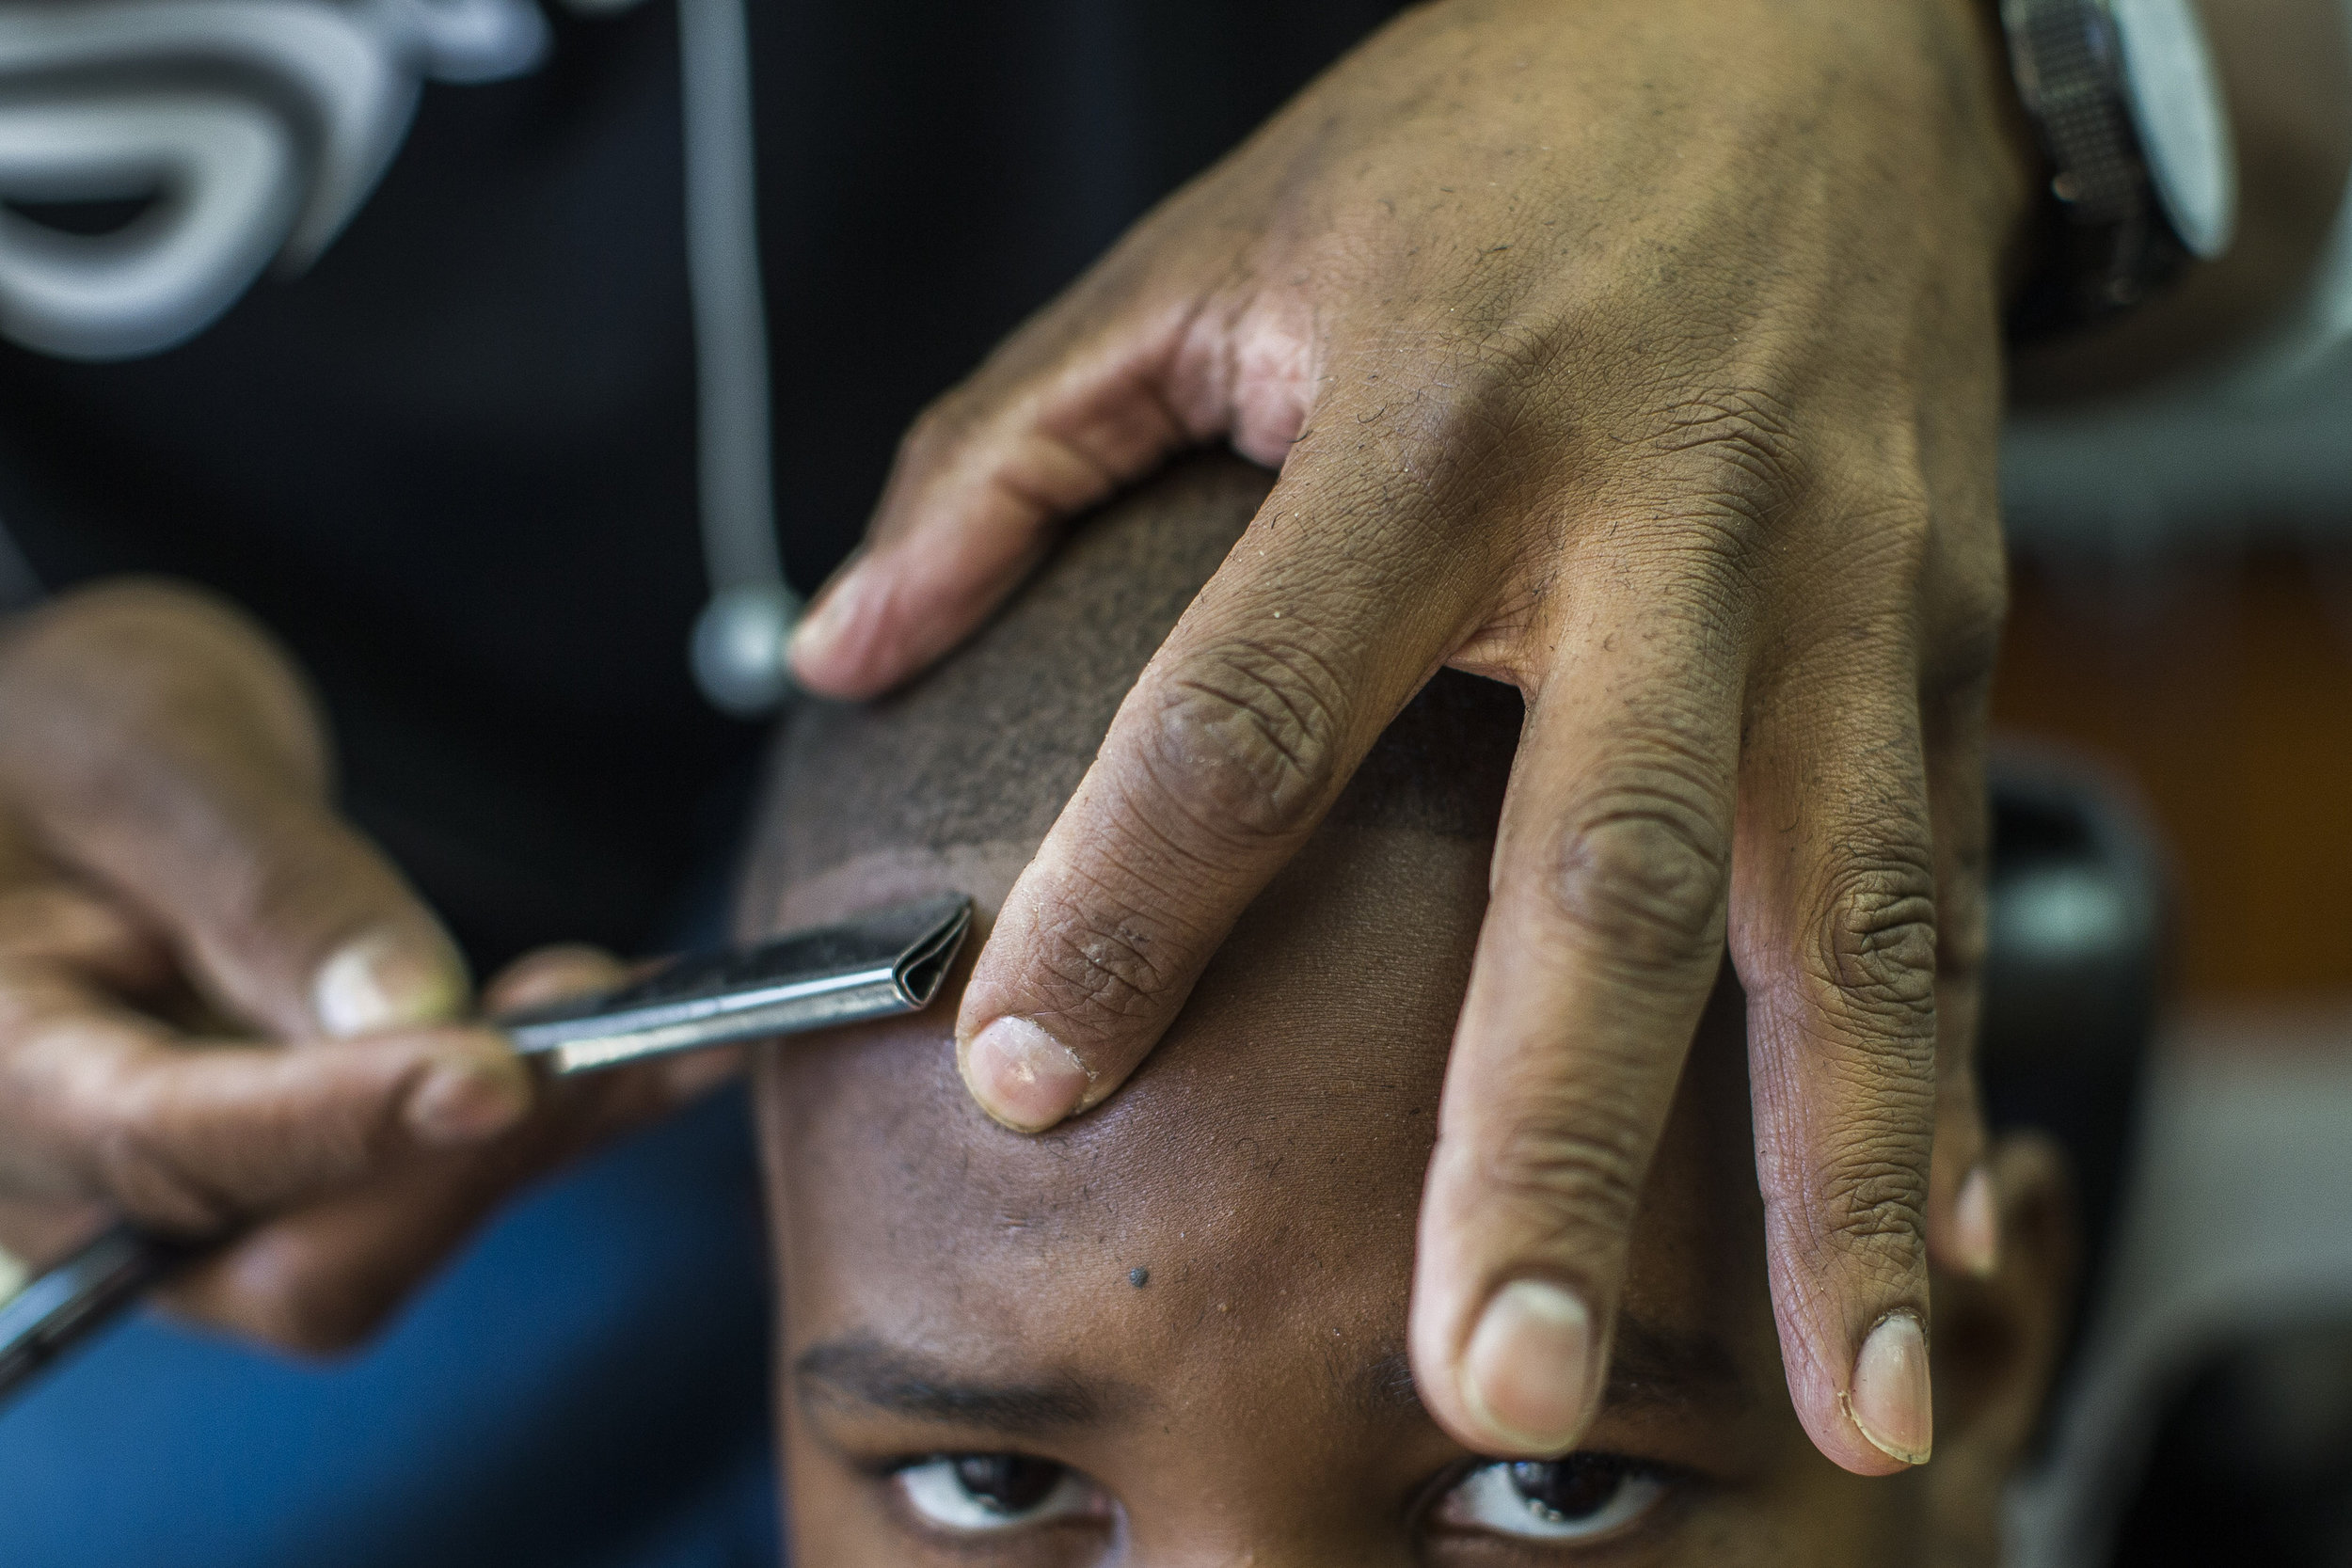  Desmond Younge, 9, has his hair cut during a free back to school haircut event at Mattapan's Finest Barbers in Boston, Massachusetts, September 6, 2015. &nbsp;This is the sixth annual event that the shop has given free haircuts and school supplies t